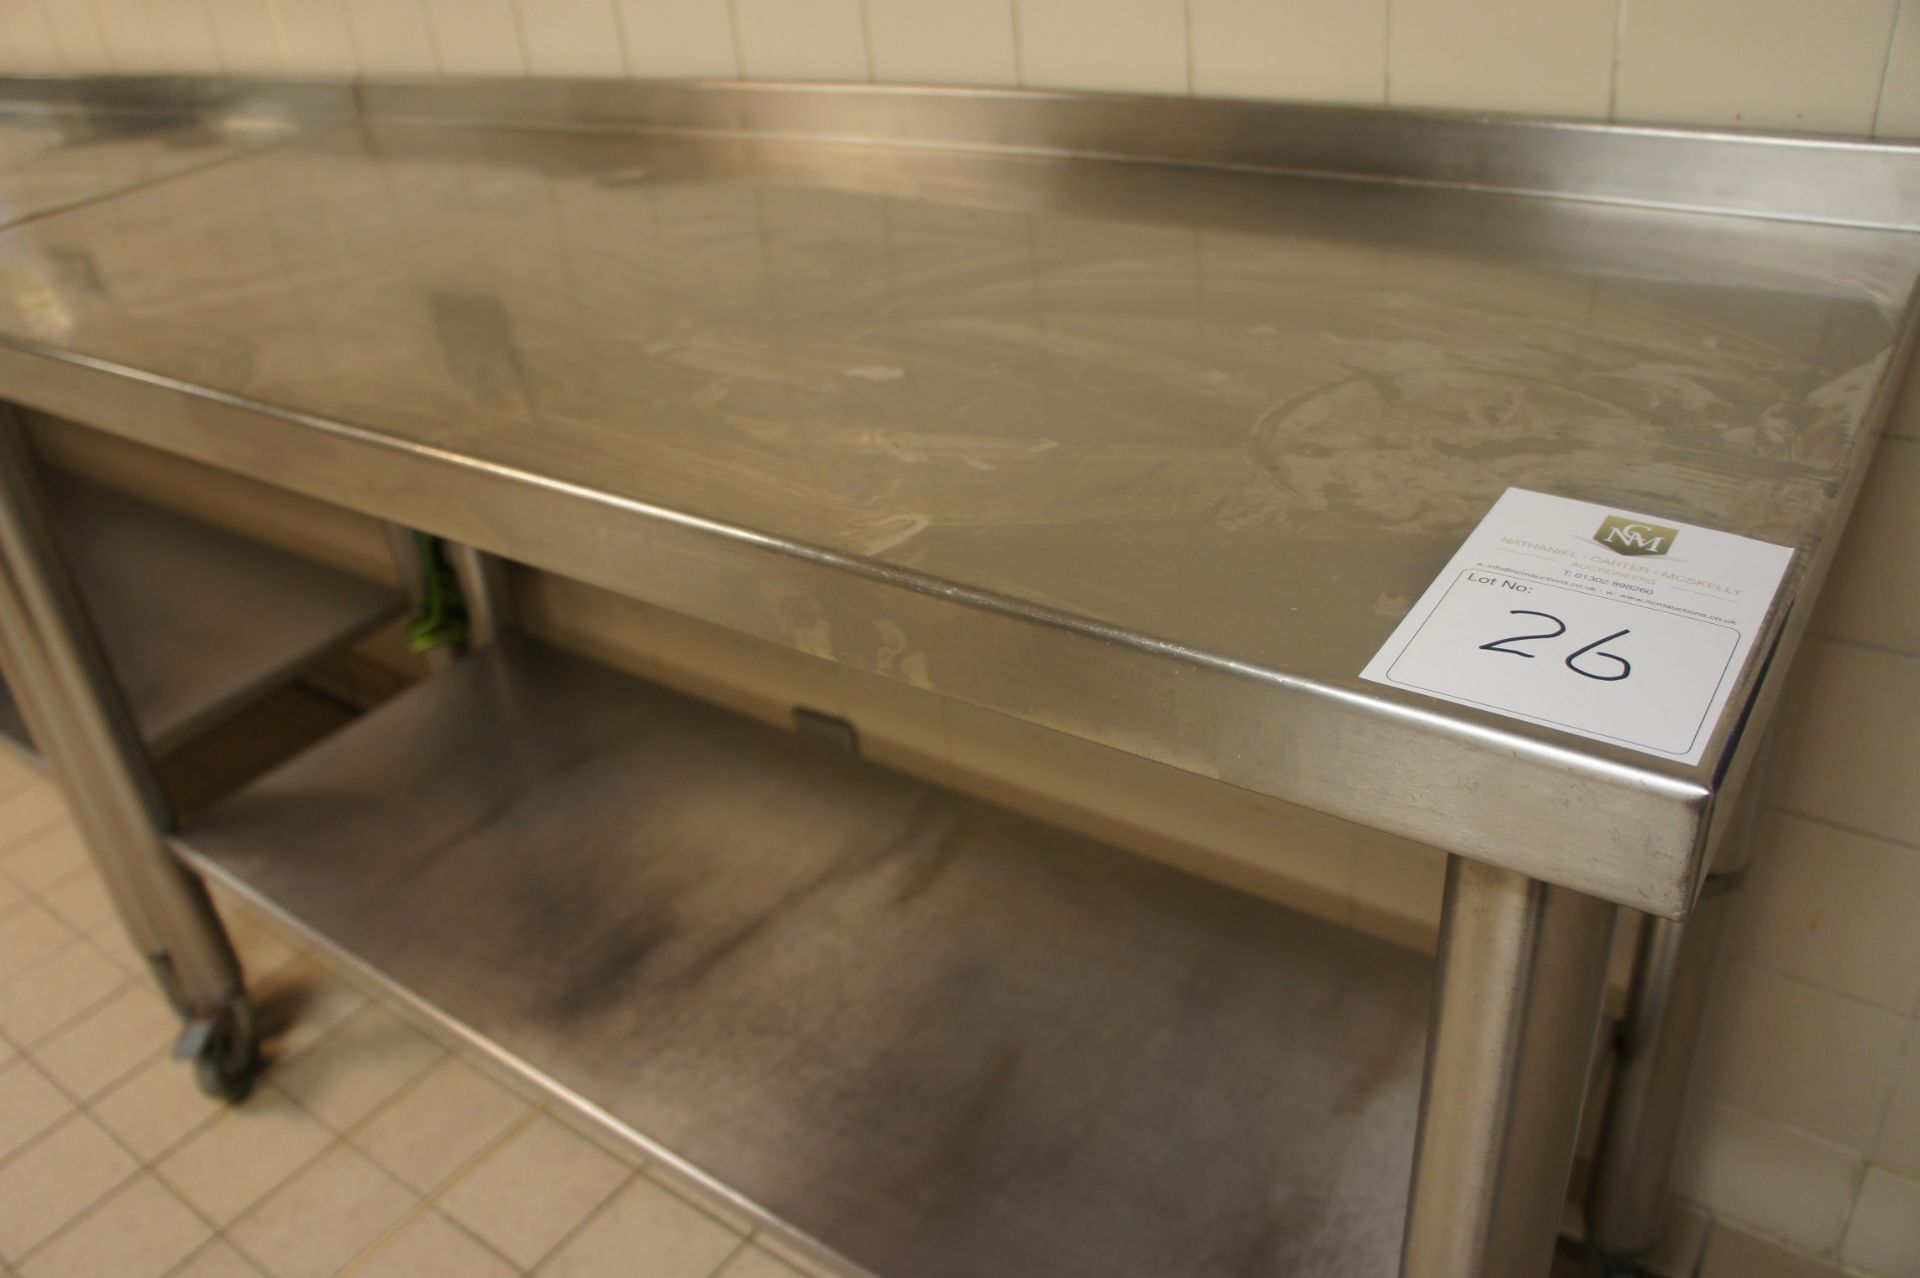 Mobile Stainless steel preparation table with shelf under, 1500mm